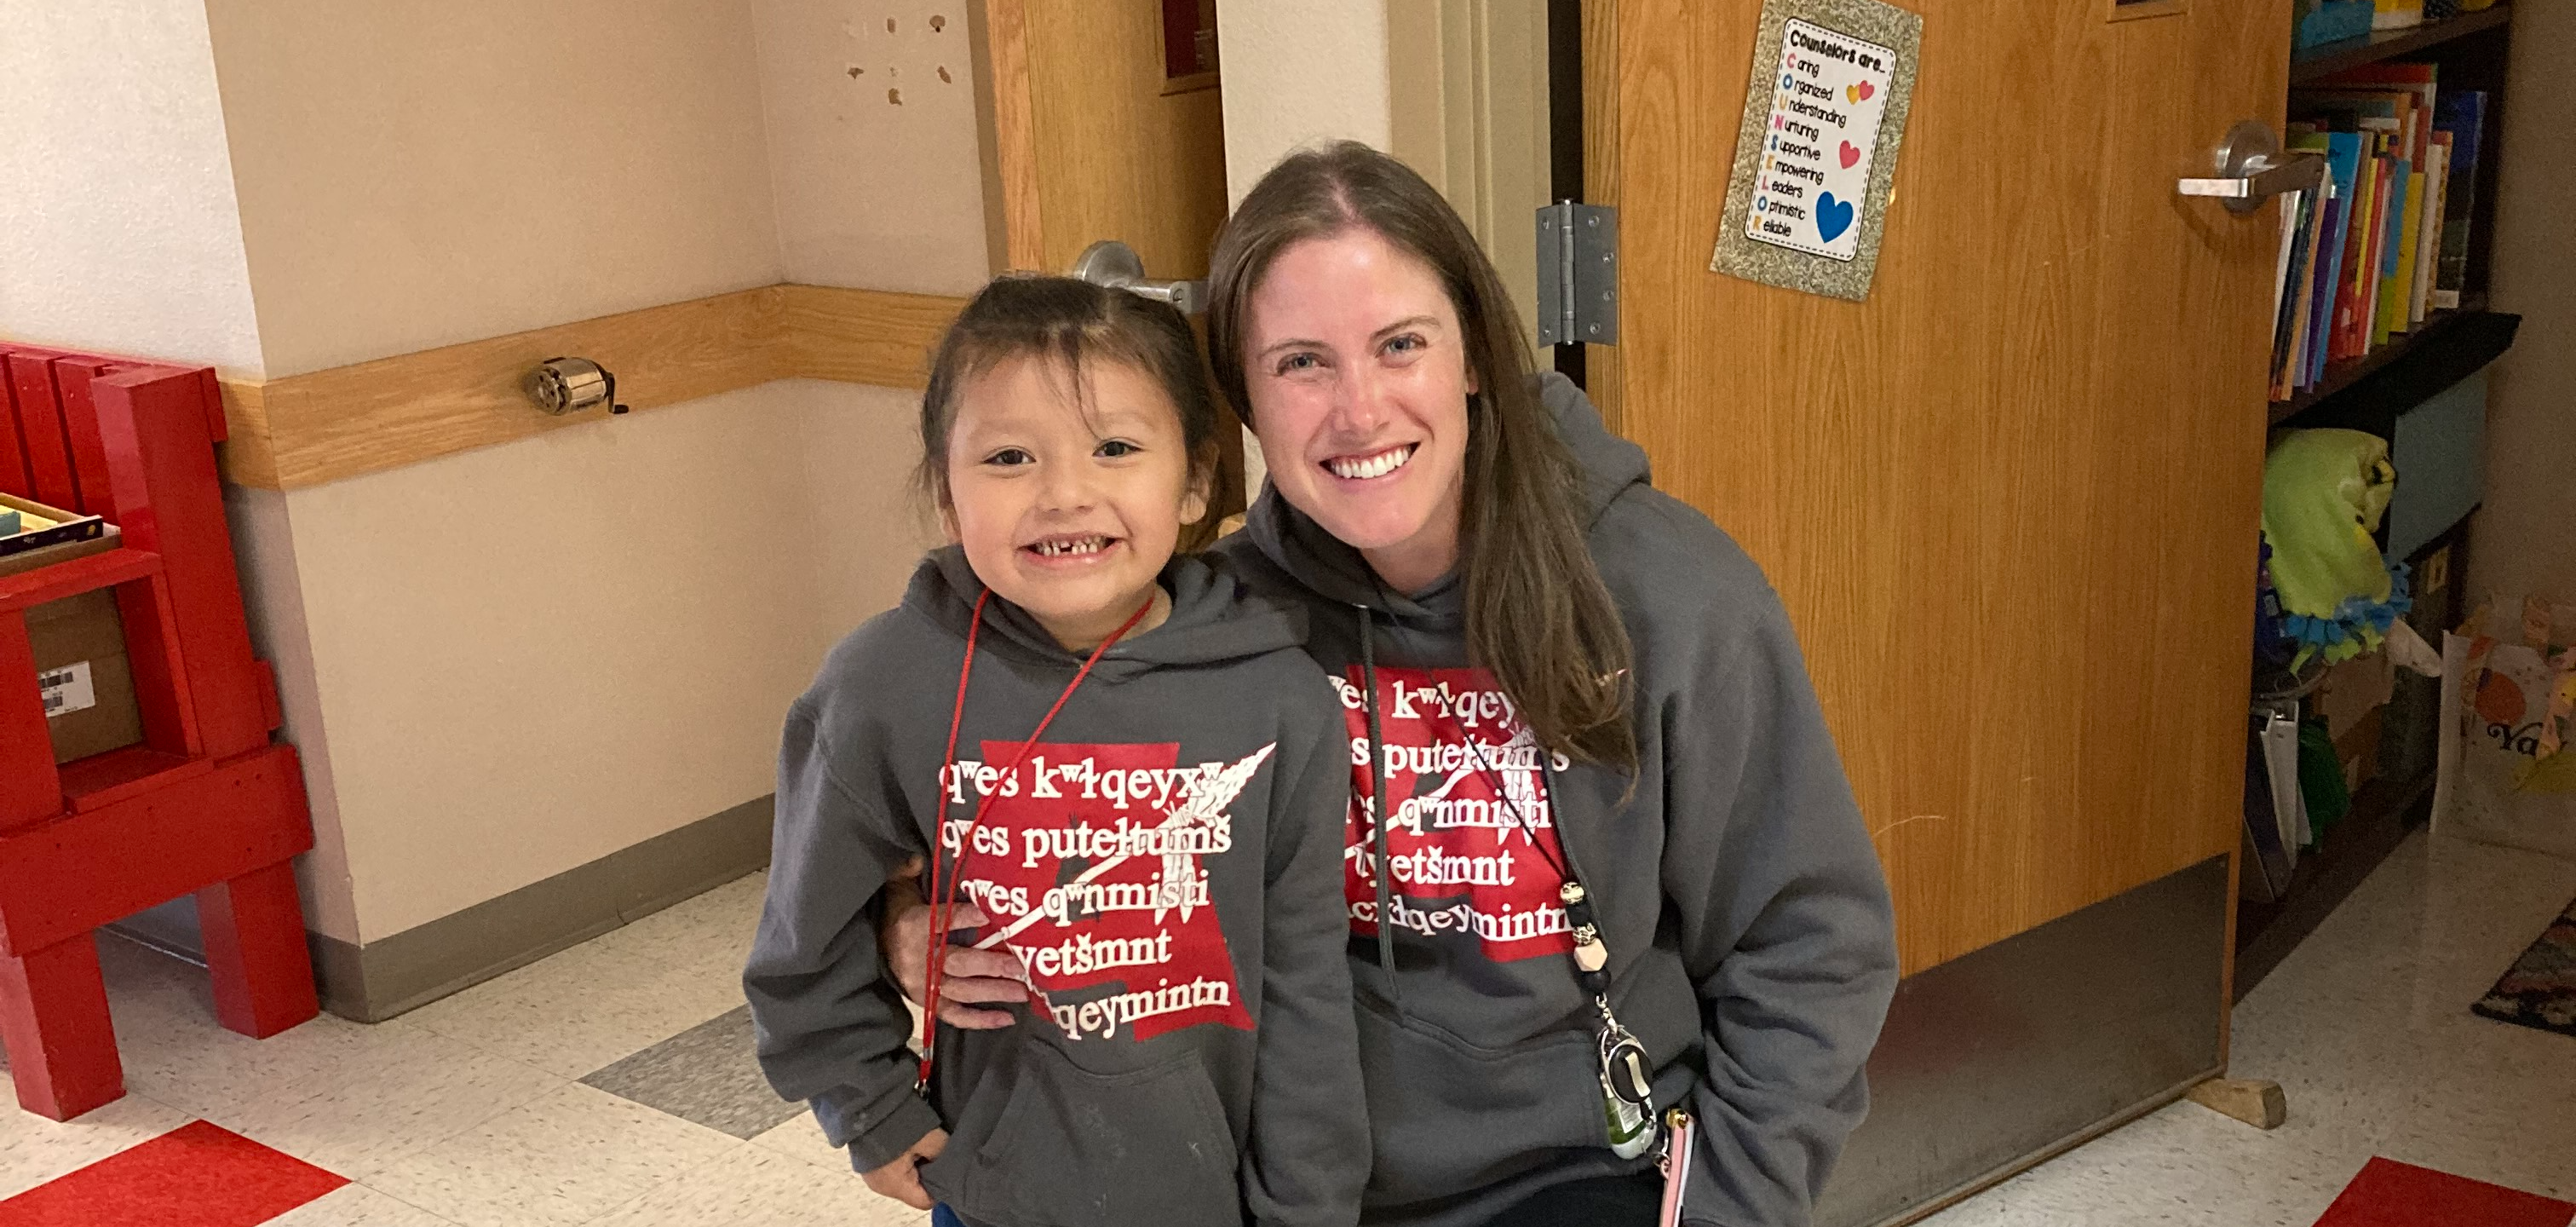  K. came in for his morning hug and could not believe his eyes when he saw we were matching. He was jumping up and down and just wiggly with excitement 🥰 Let’s all be more like him and find joy in the little things! 